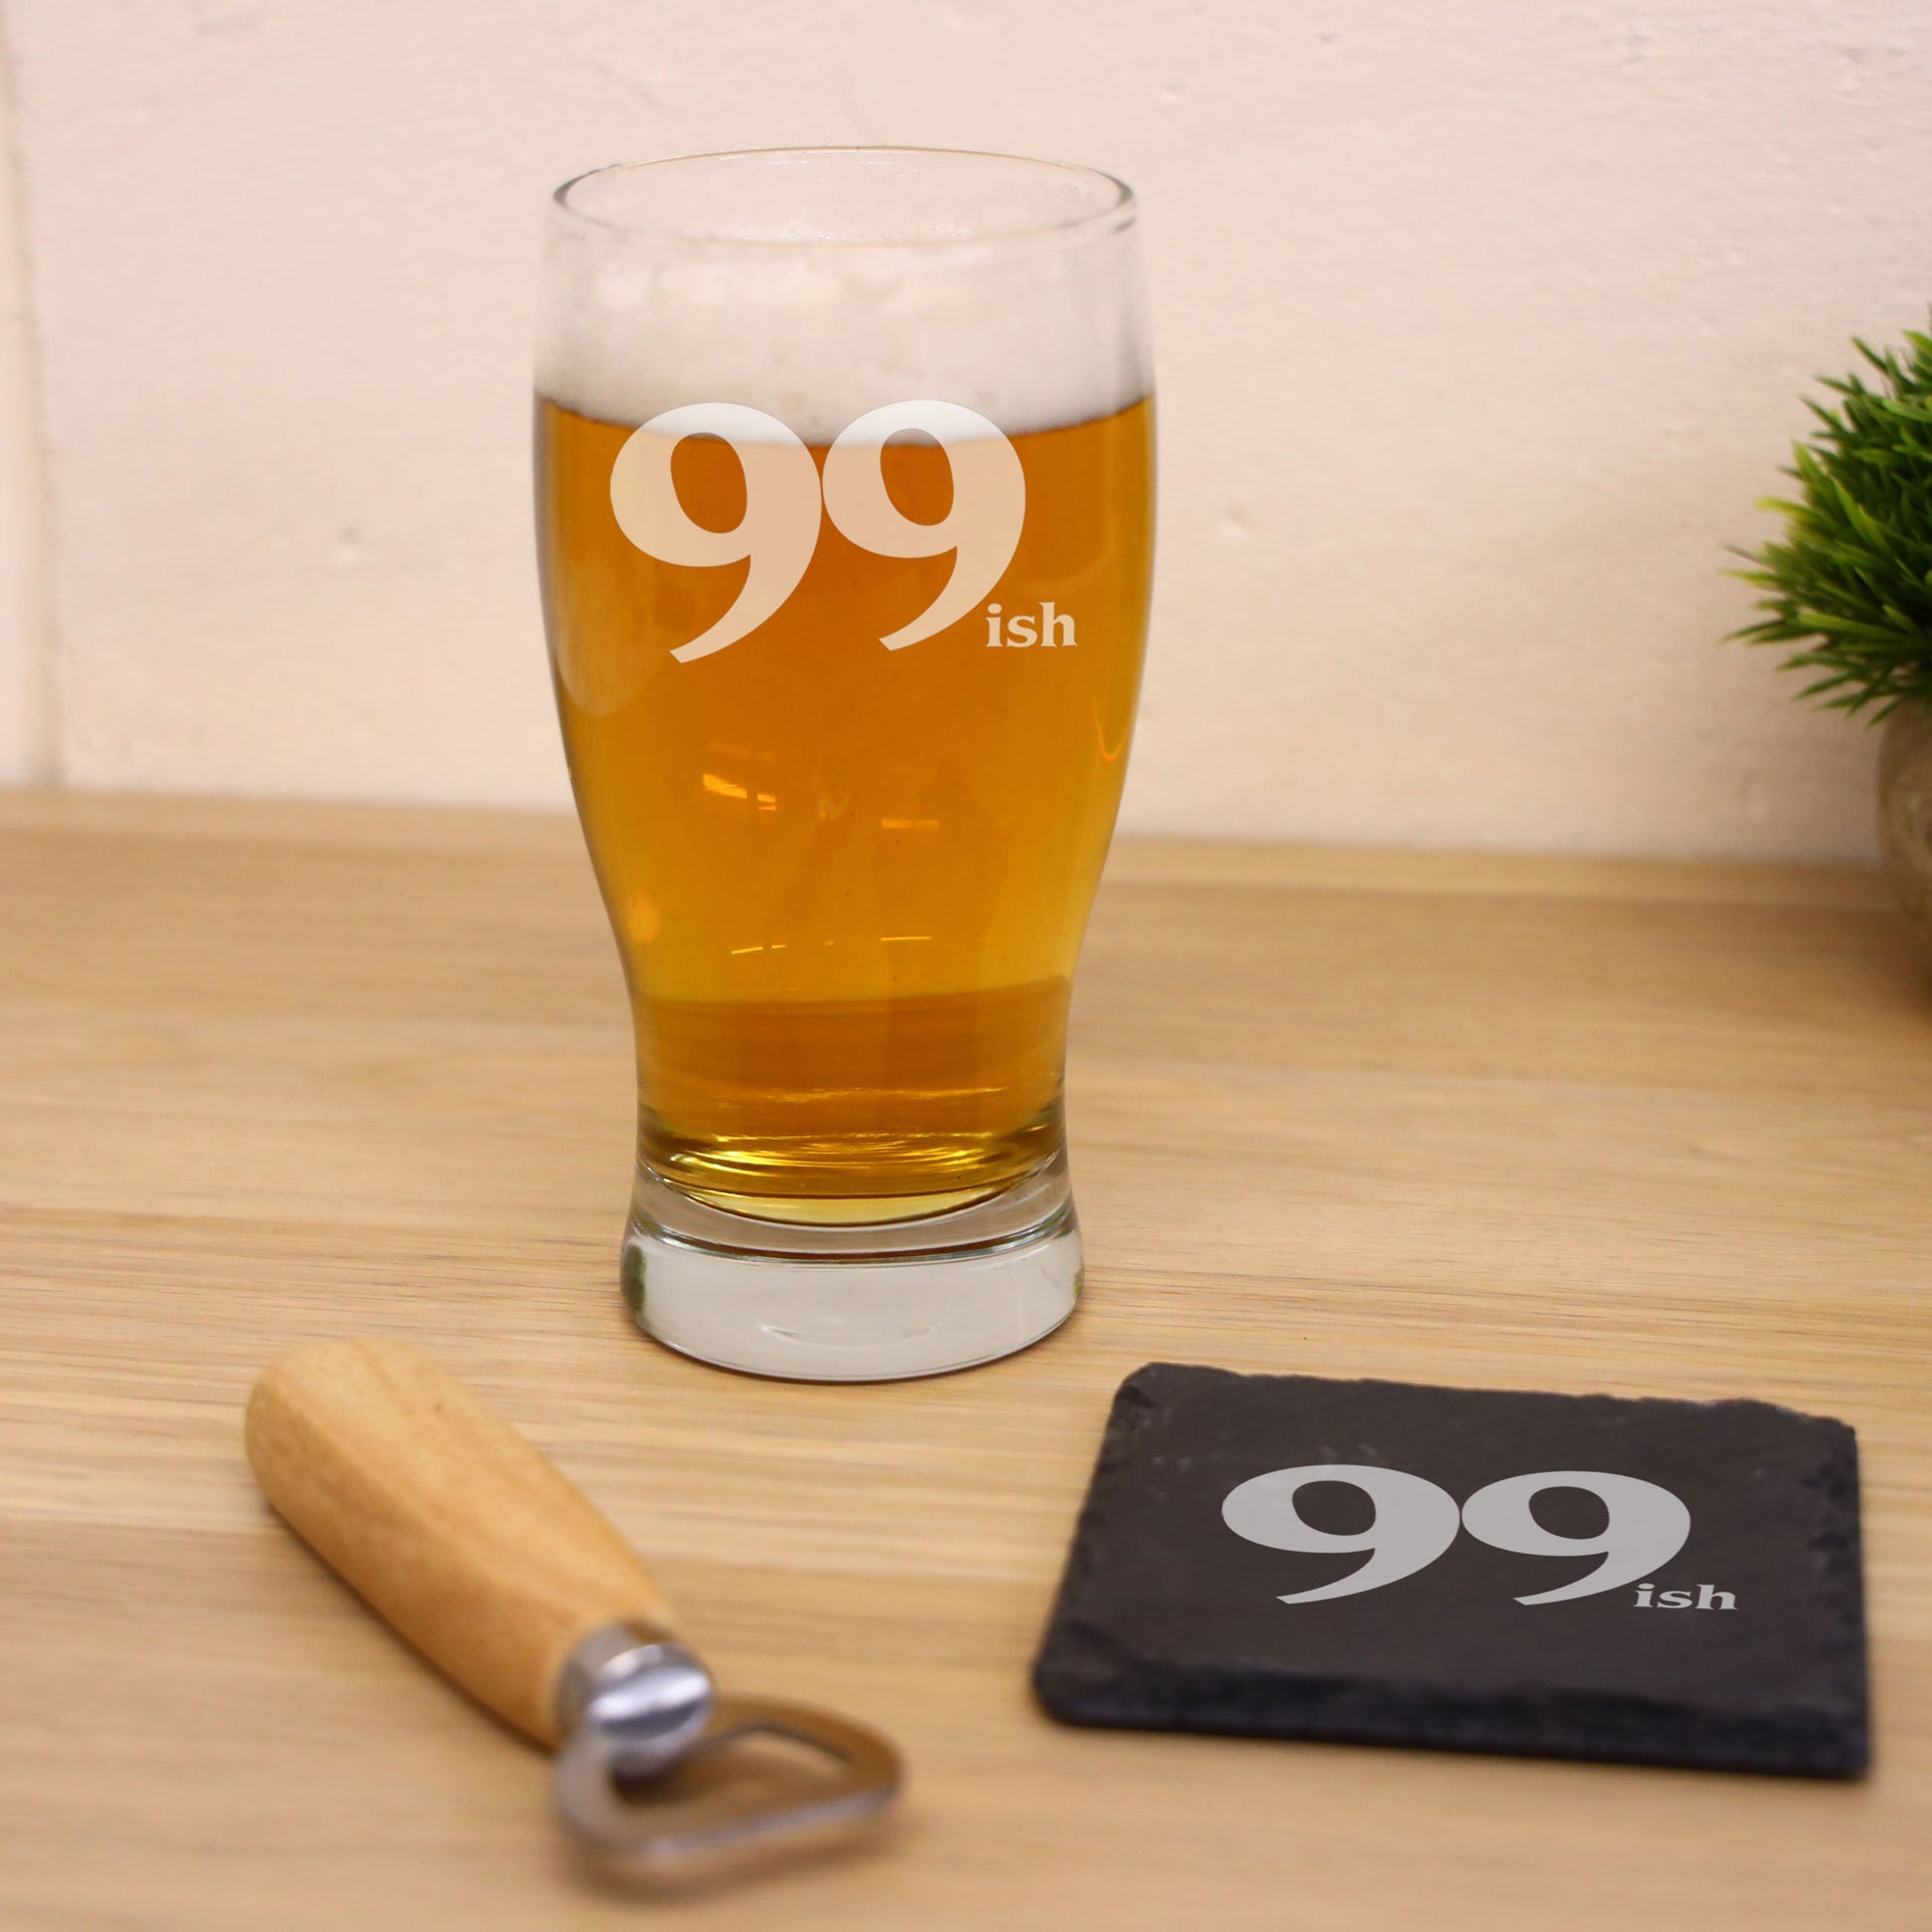 99ish Pint Glass and/or Coaster Set  - Always Looking Good - Glass & Square Coaster Set  